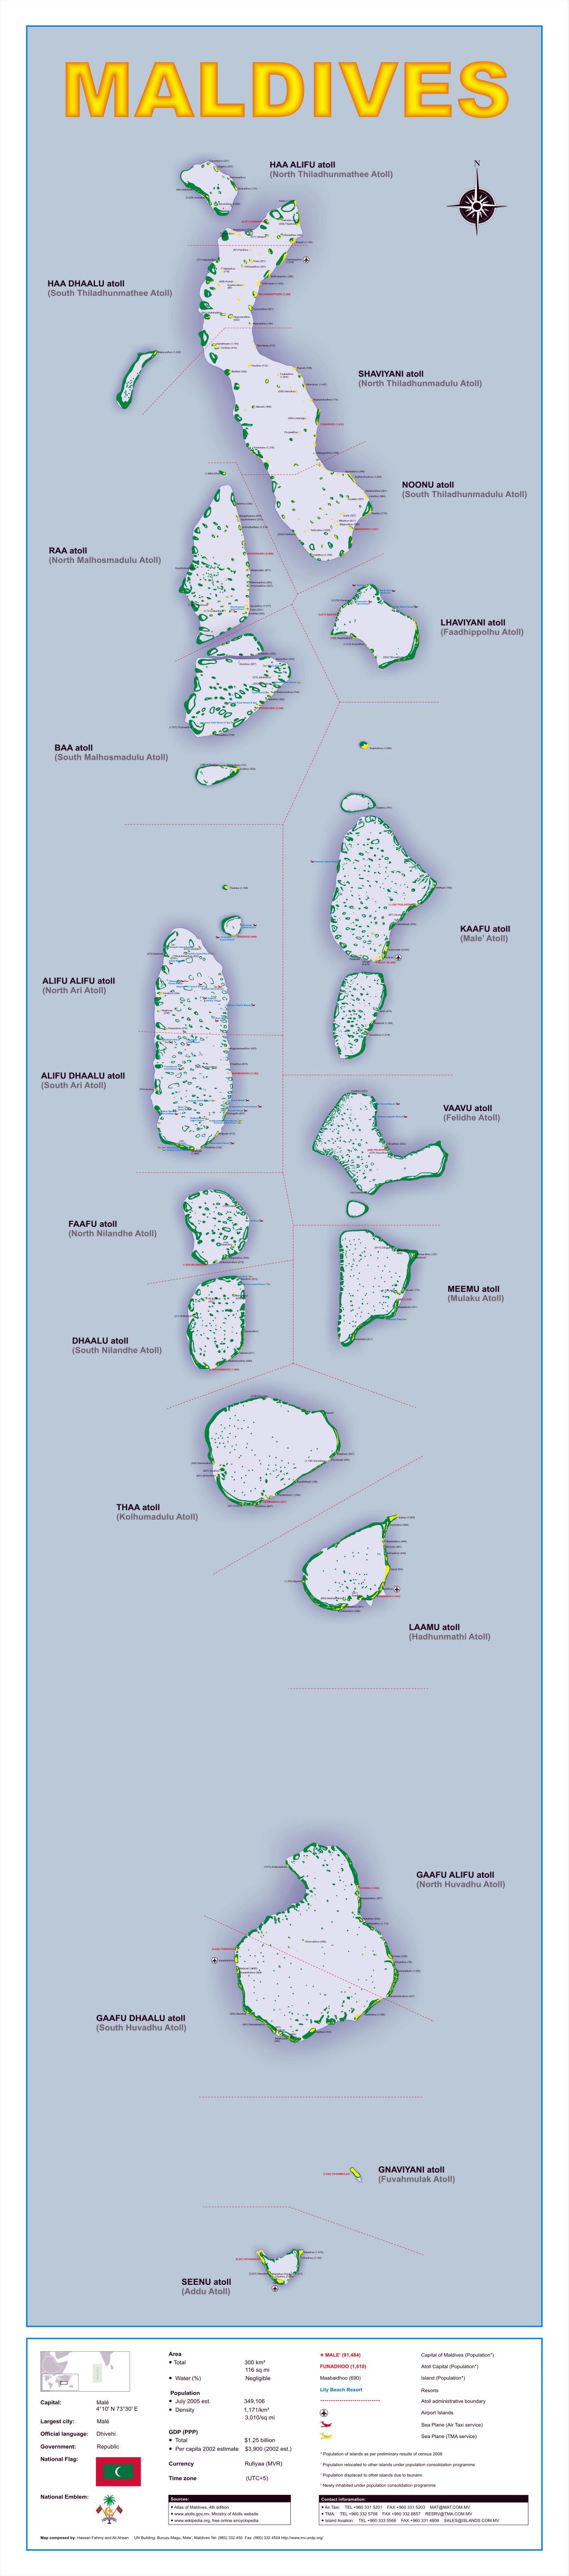 Large detailed political and administrative map of Maldives